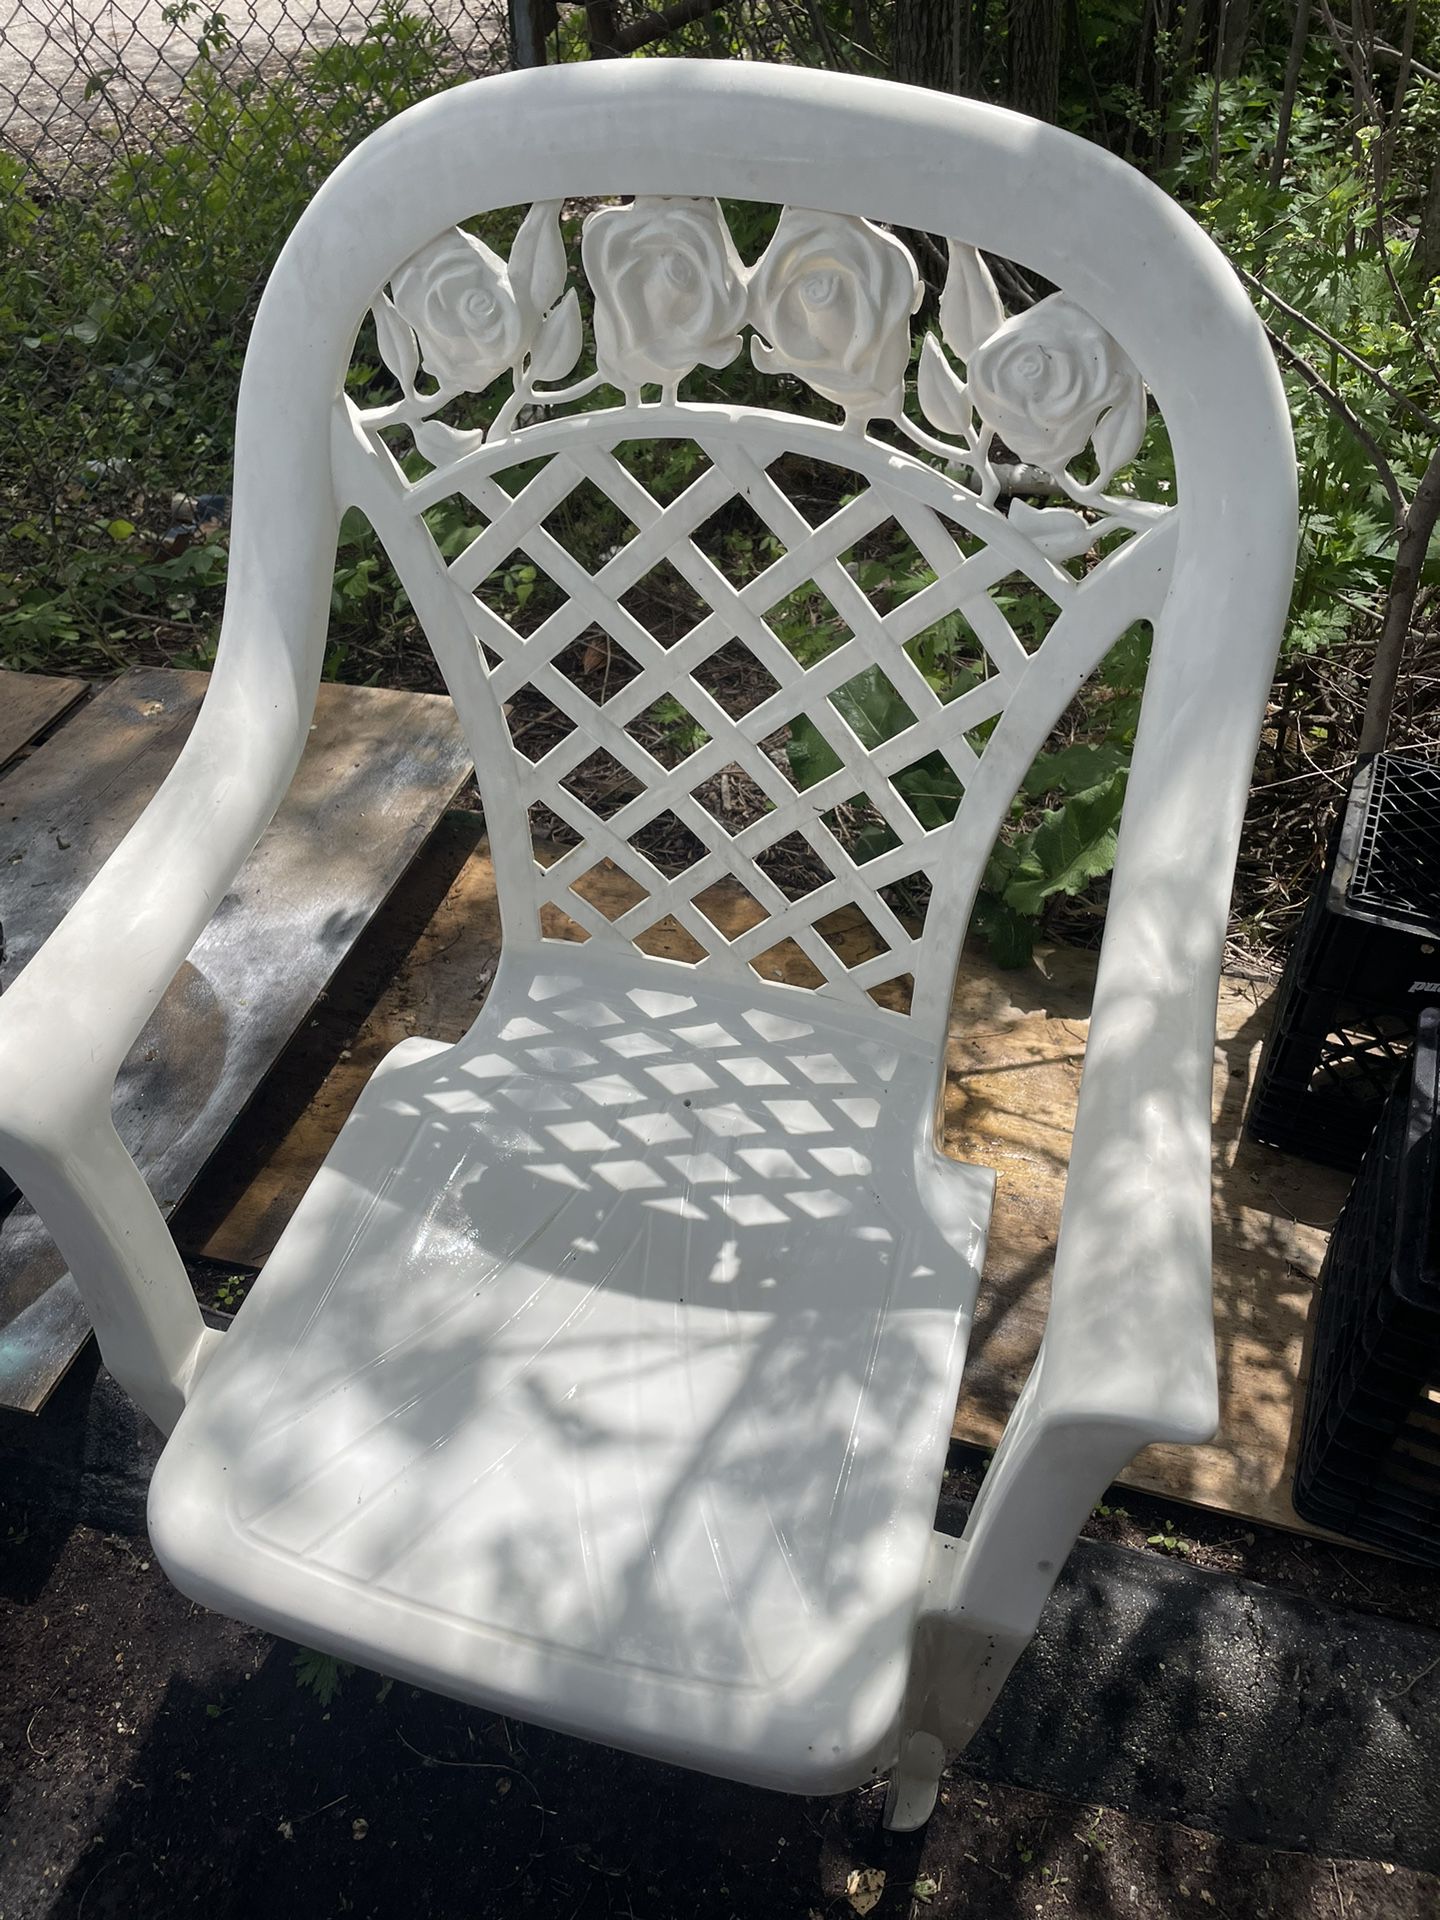 Four plastic chairs